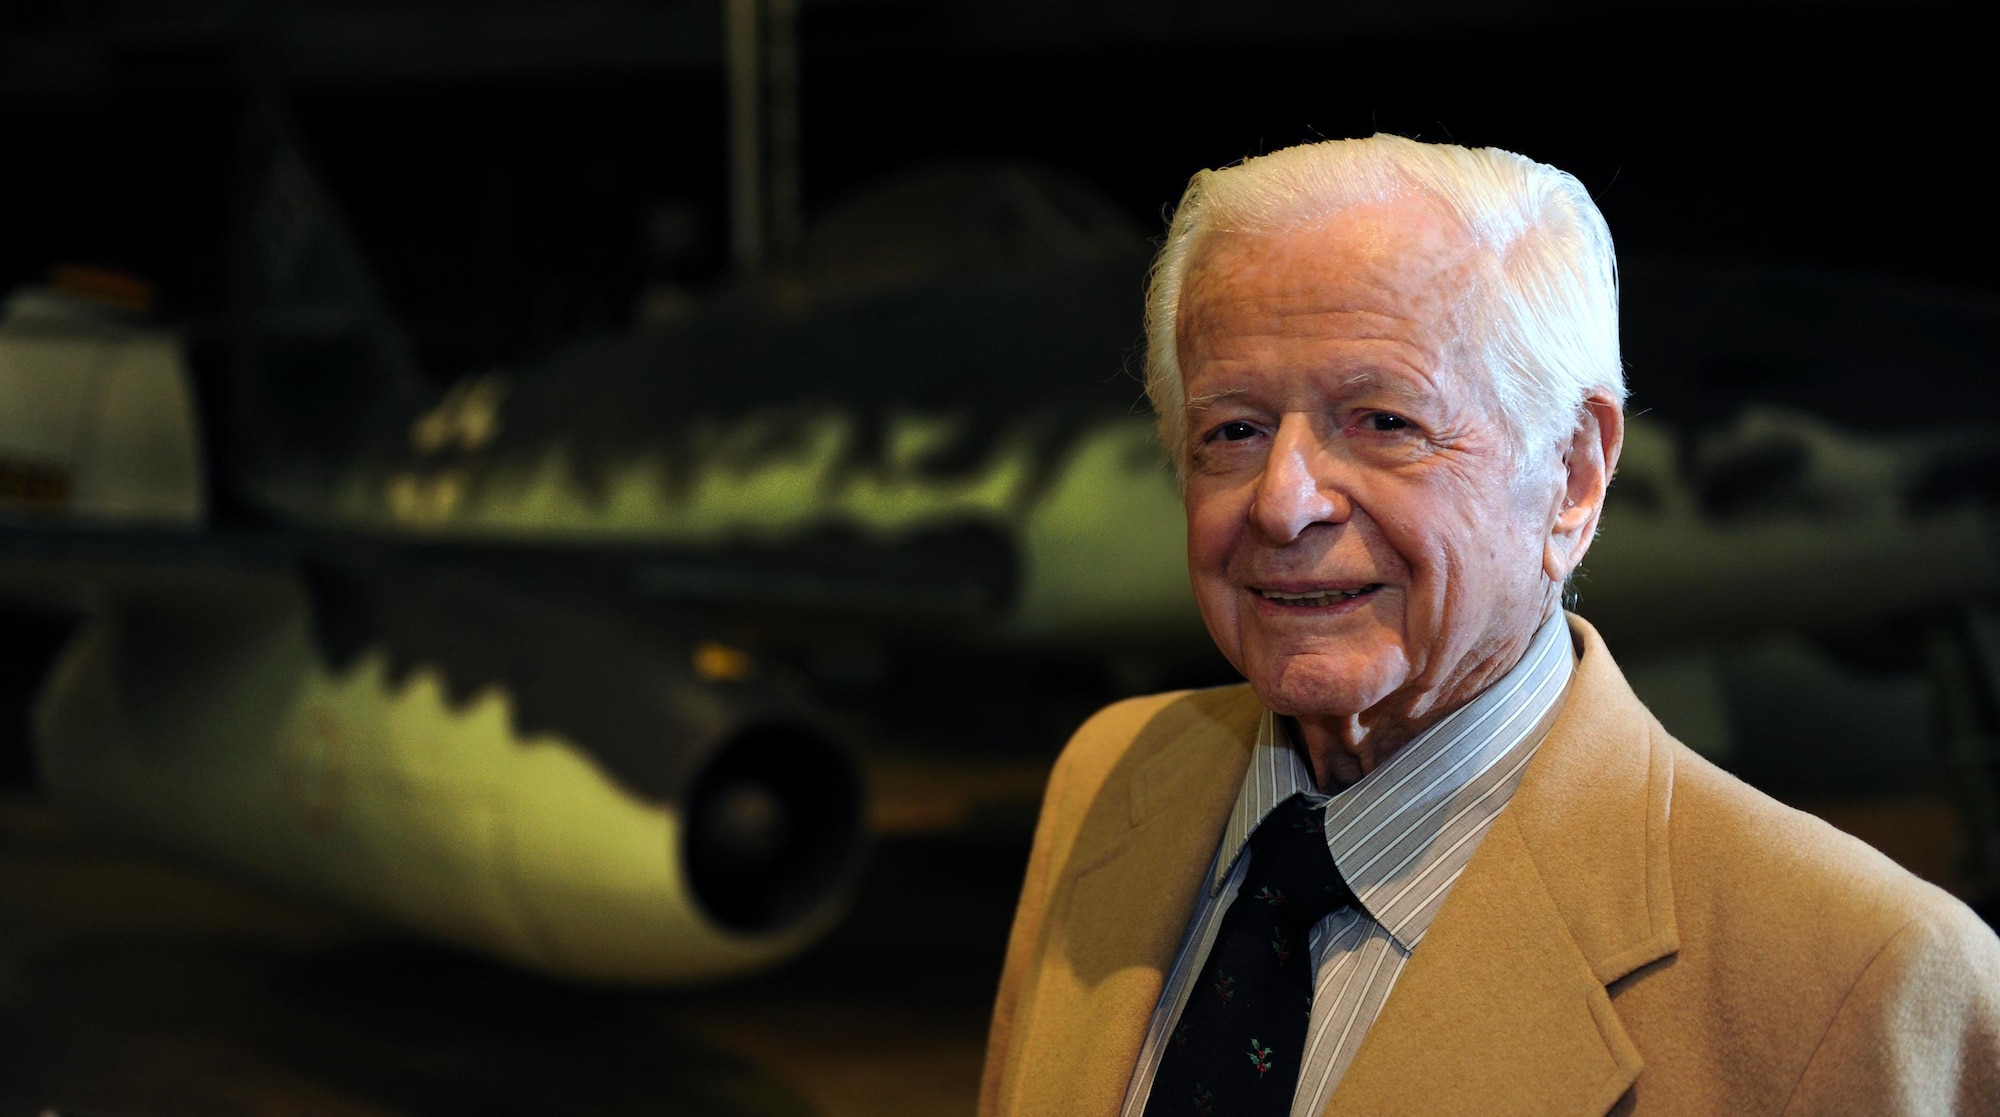 Victor Bilek, a National Air and Space Intelligence Center alum, stands in front of the German Messerschmitt Me 262 Schwalbe Wednesday, Dec. 9, 2015 at the National Air Force Museum. He worked on the exploitation of the plane's armament systems during WWII. At 97 years old, Bilek is the oldest living NASIC alum. He recently came to the Center to share his war stories with today's generation of Airmen. (U.S. Air Force photo by Tech. Sgt. Raymond Hoy)